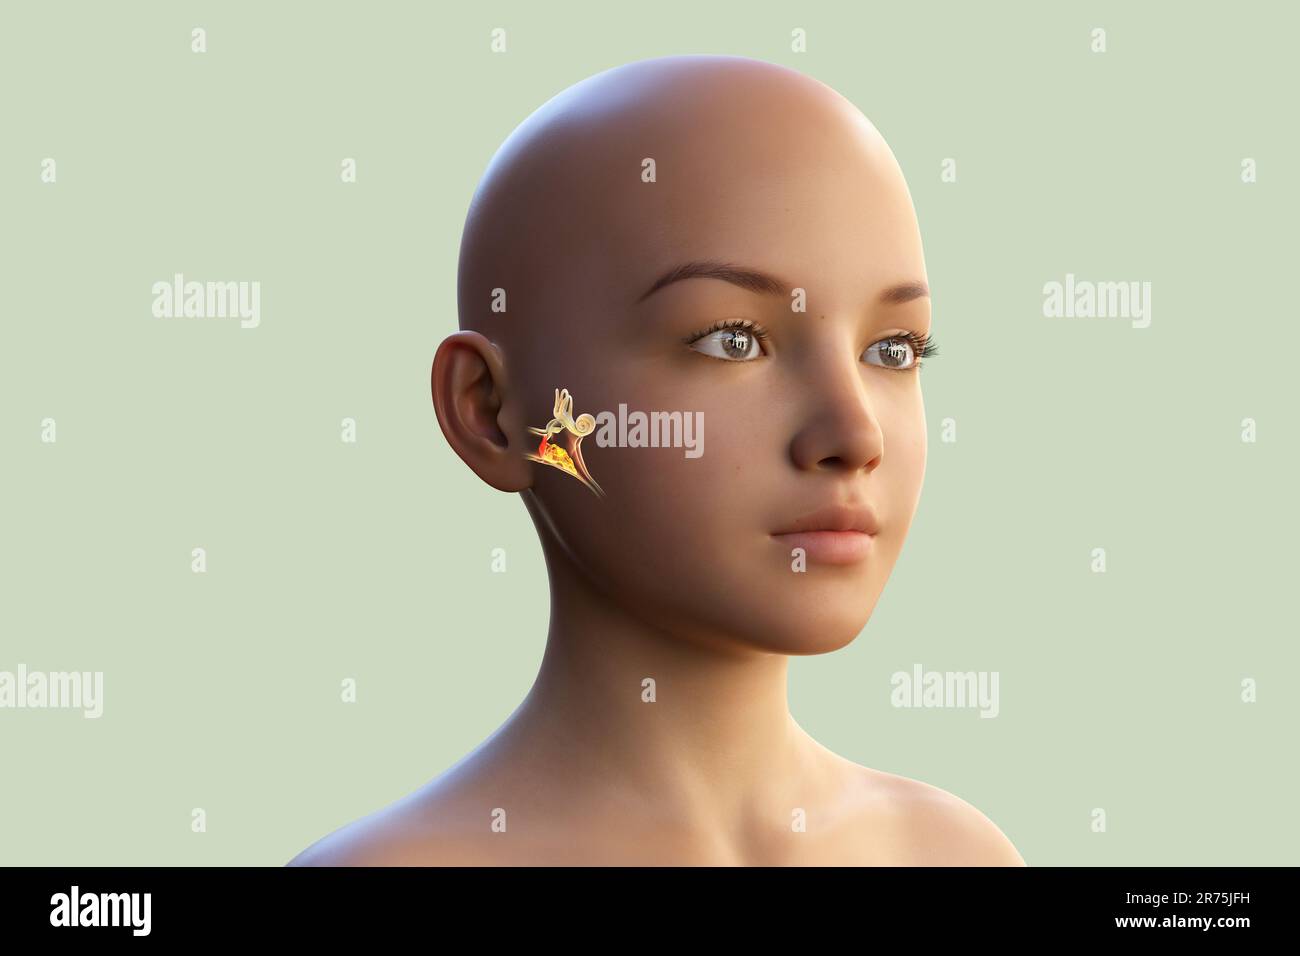 Otitis media, a group of inflammatory diseases of the middle ear. Computer illustration showing a girl with highlighted structures of the middle and i Stock Photo